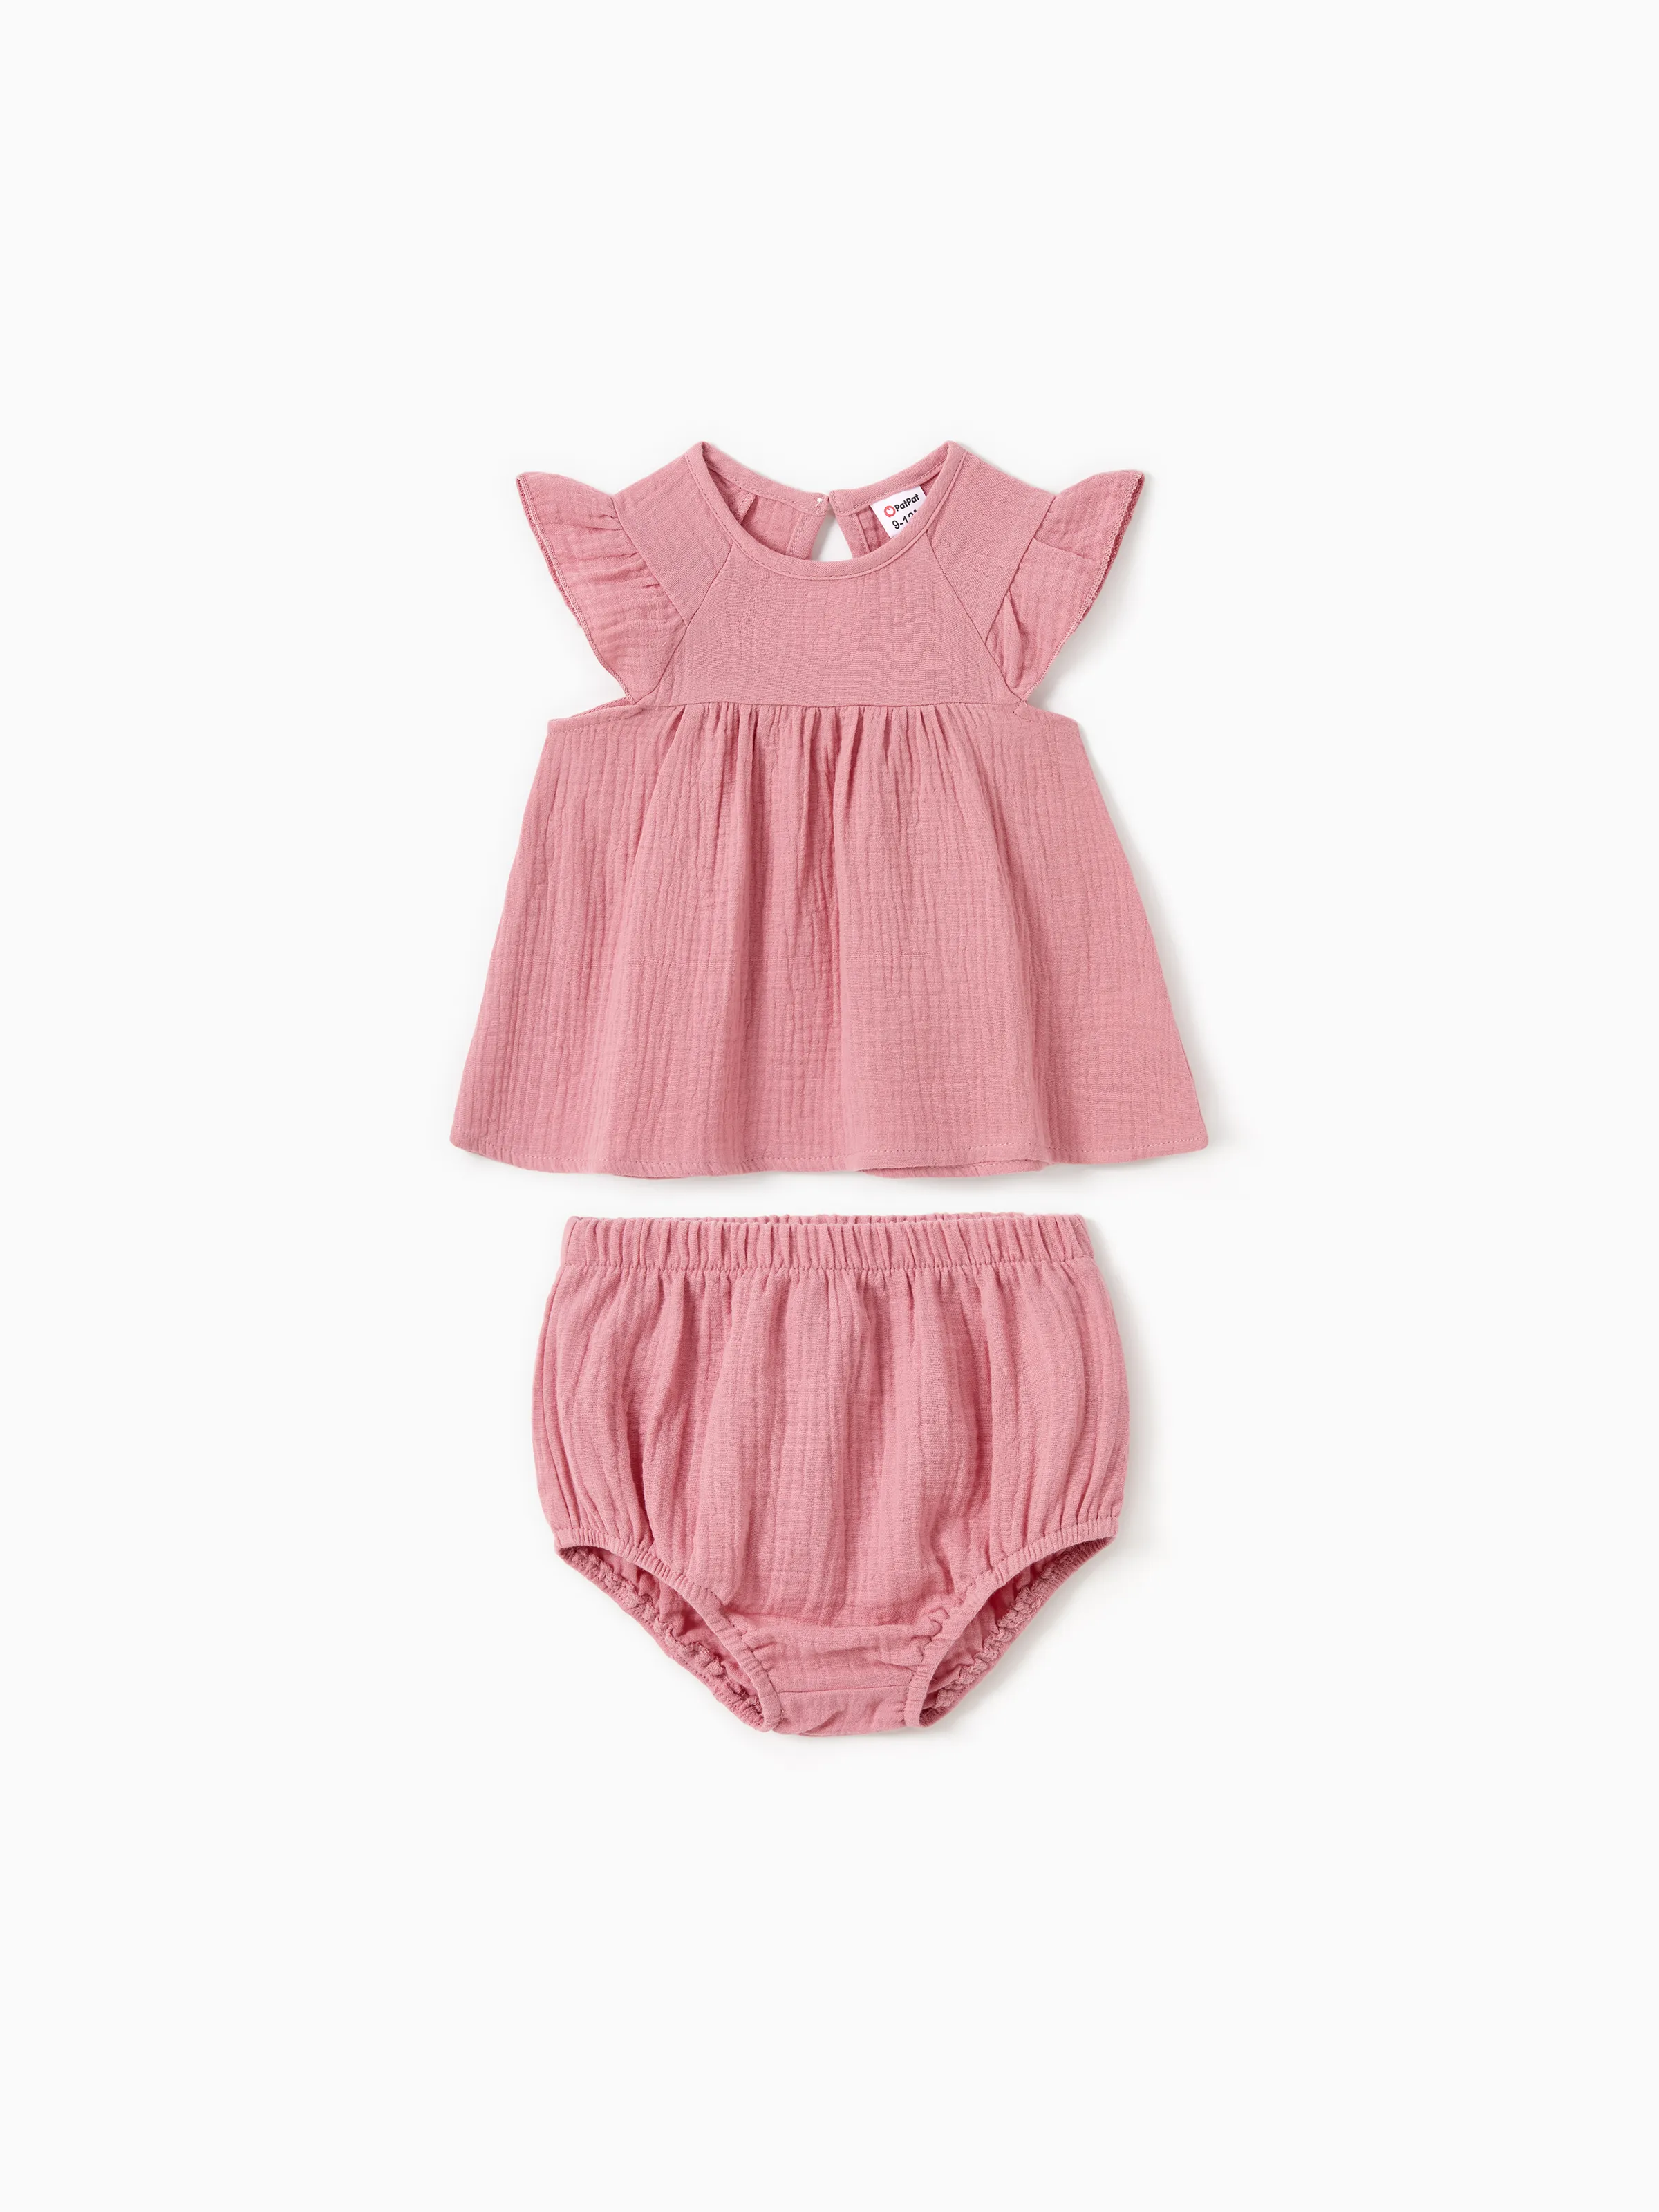 

Mommy and Me Matching Pink Button Up Belted Ruffle Trim High-Low Dresses